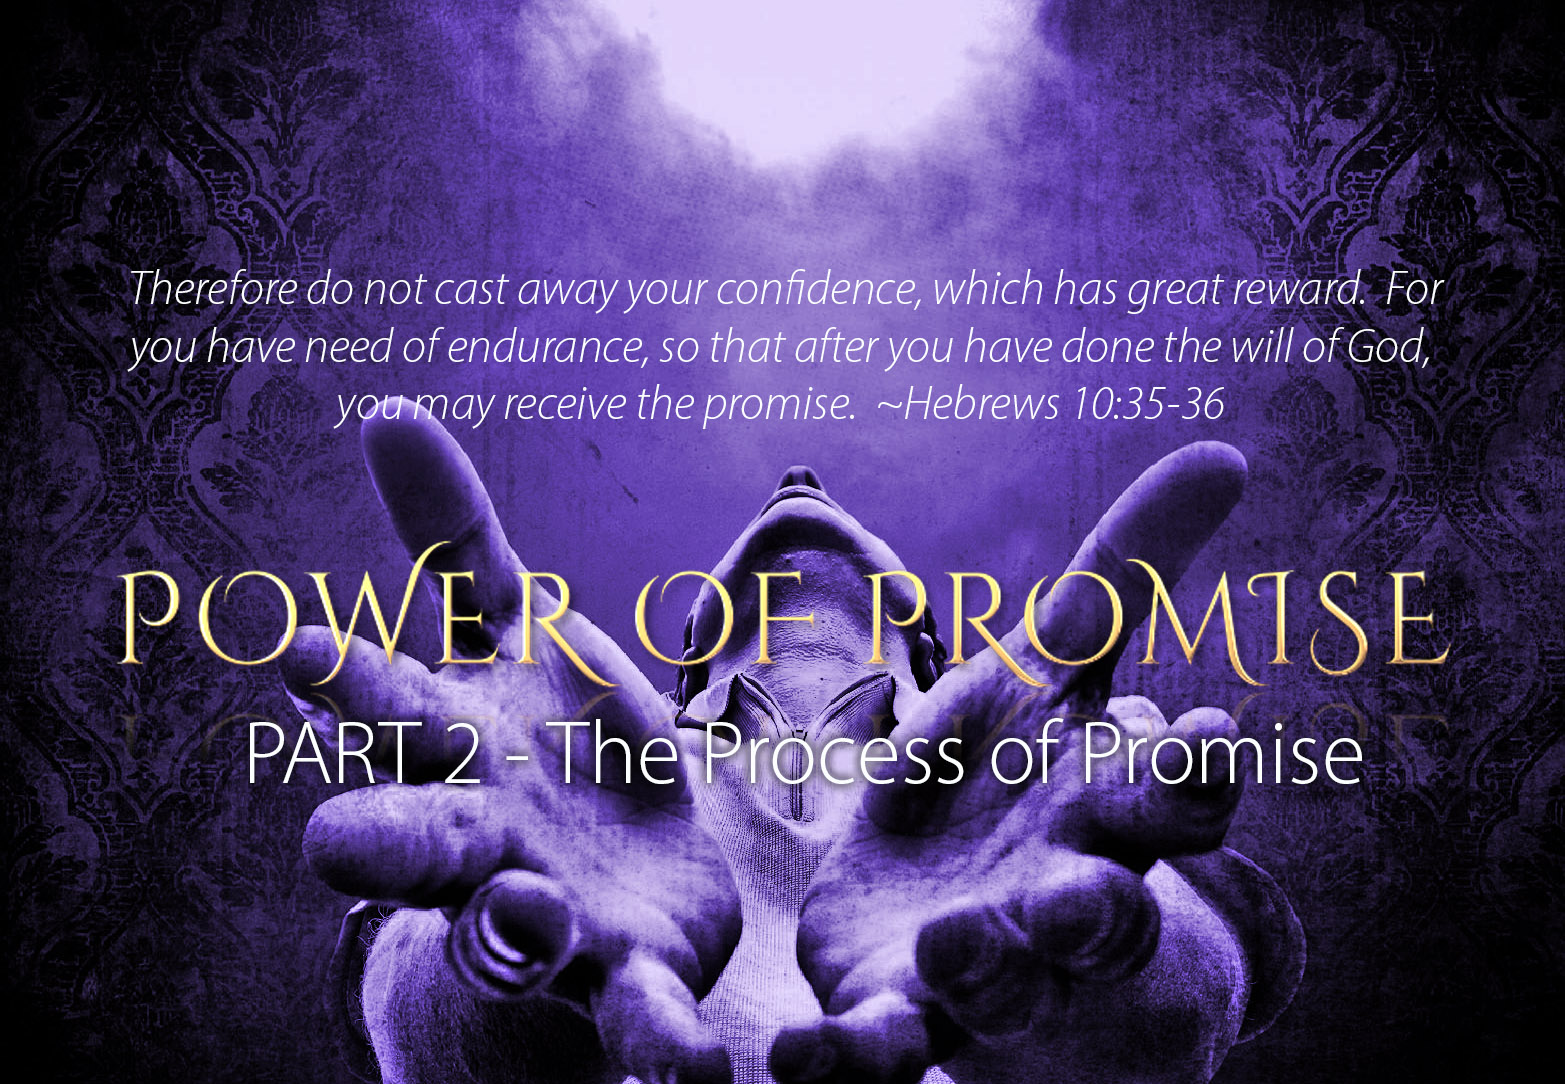 The Power of Promise, Part 2, The Process of Promise